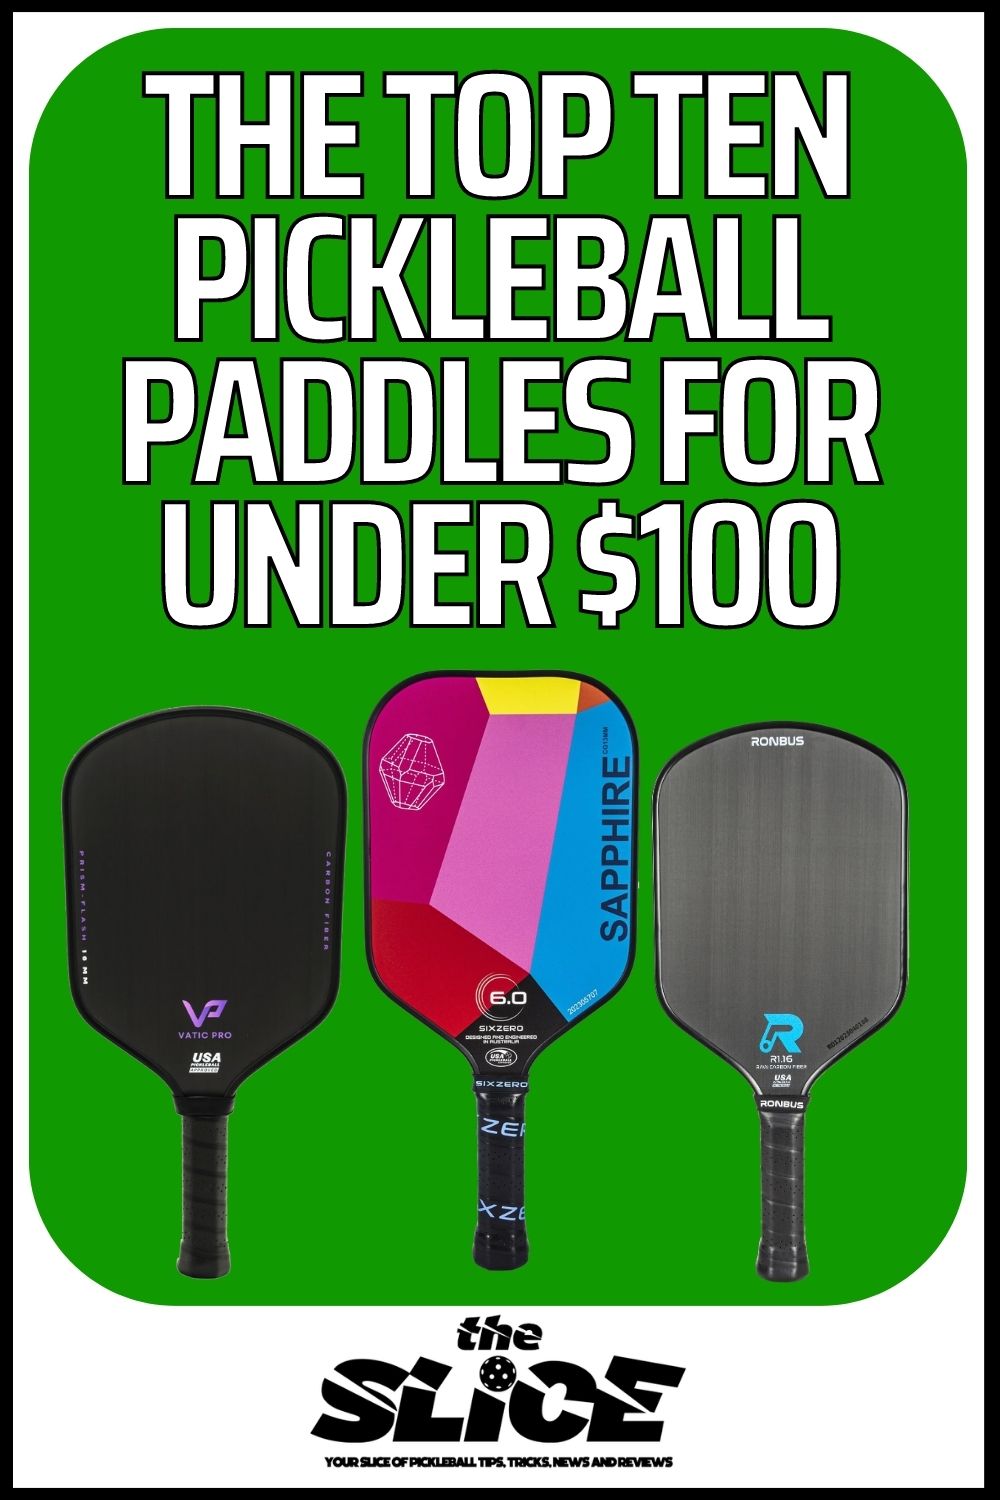 The Top Ten Pickleball Paddles for Under $100